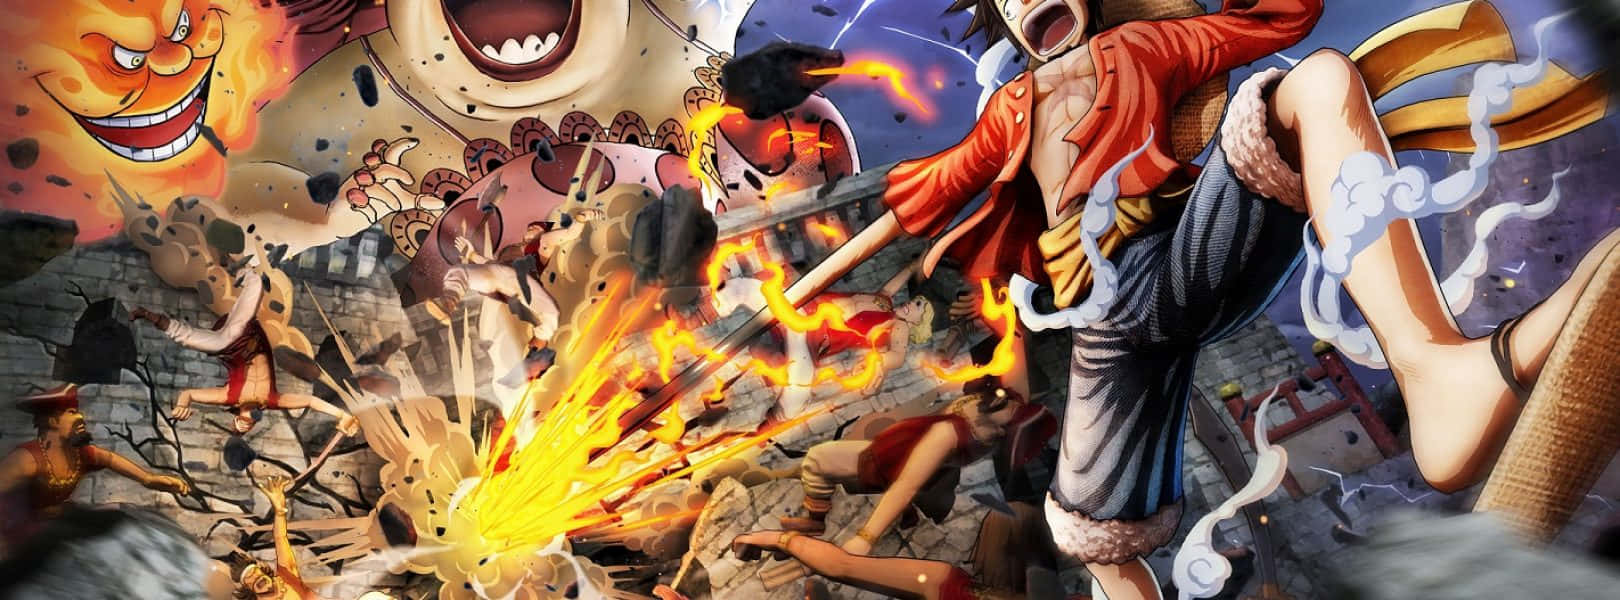 A Glimpse of the Marineford Aftermath in One Piece Wallpaper